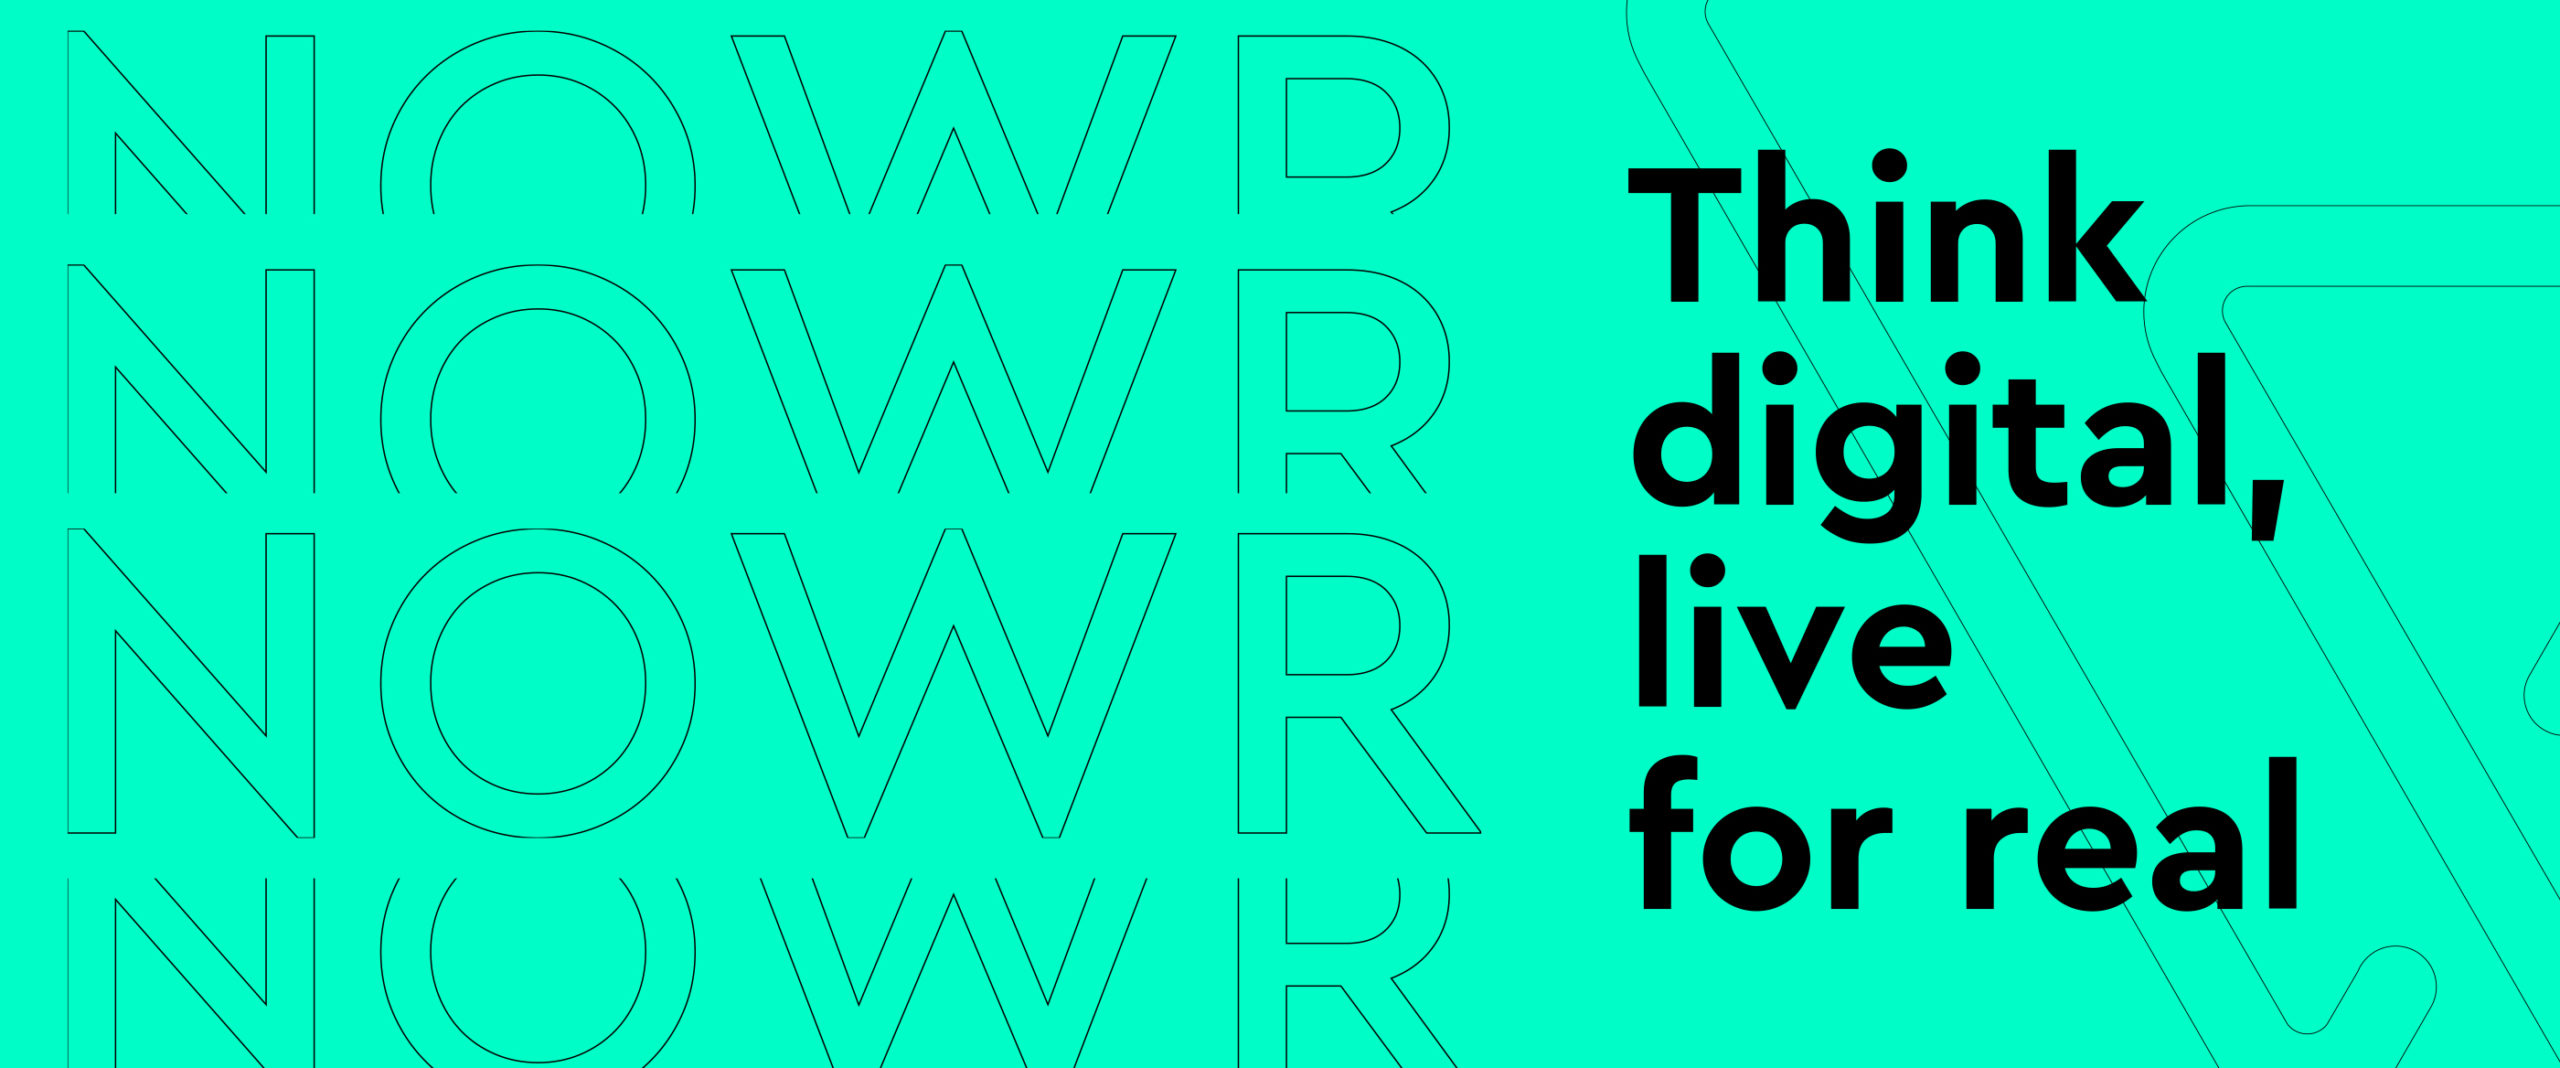 Think digital, live for real with NOWR